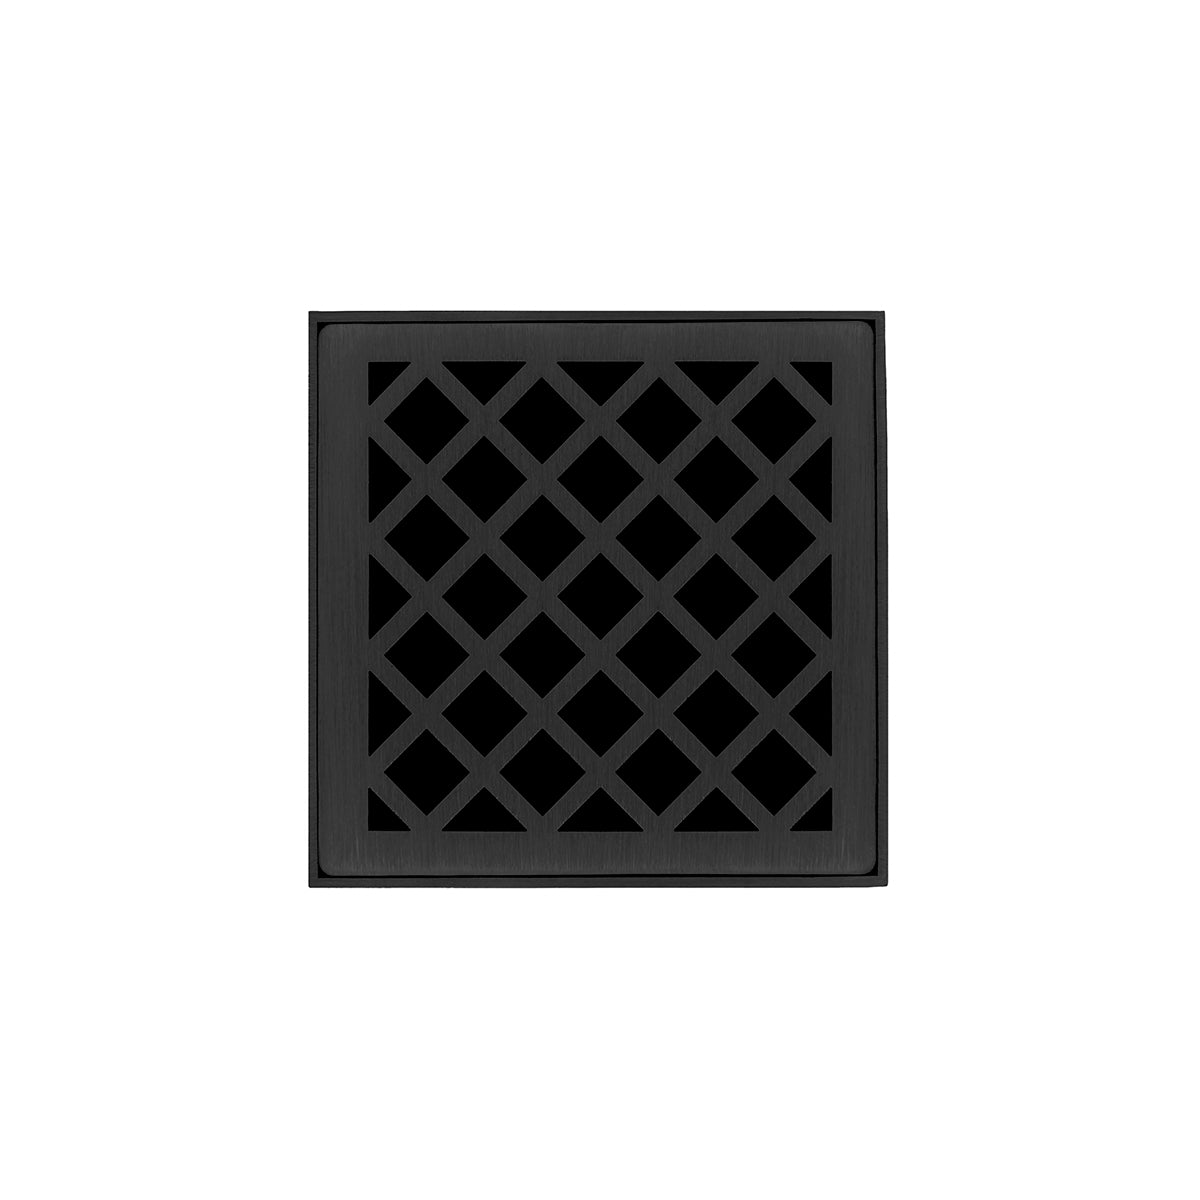 Infinity Drain 4" x 4" XD 4 Premium Center Drain Kit with Criss-Cross Pattern Decorative Plate with Cast Iron Drain Body for Hot Mop, 2" Outlet